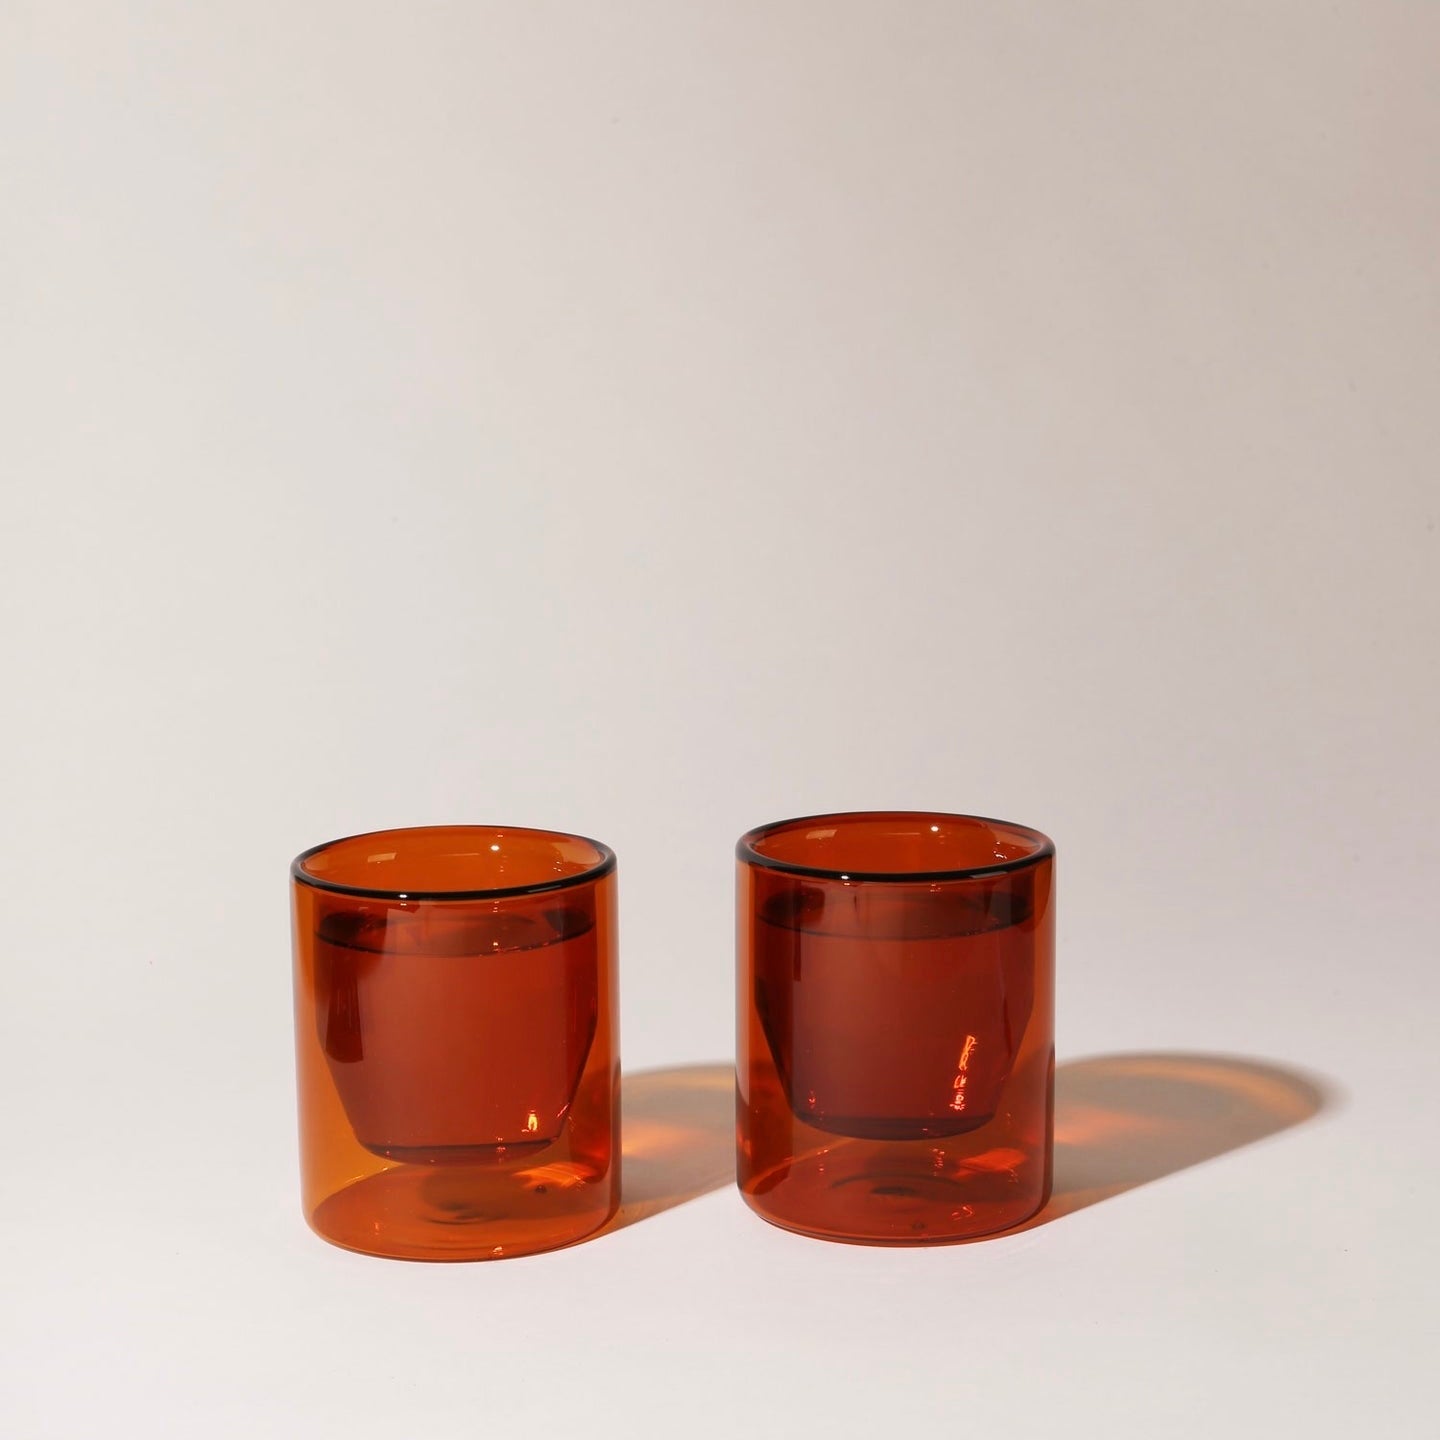 YIELD Double-Walled Glass Tumblers, Set of 2, Tall or Short Sizes